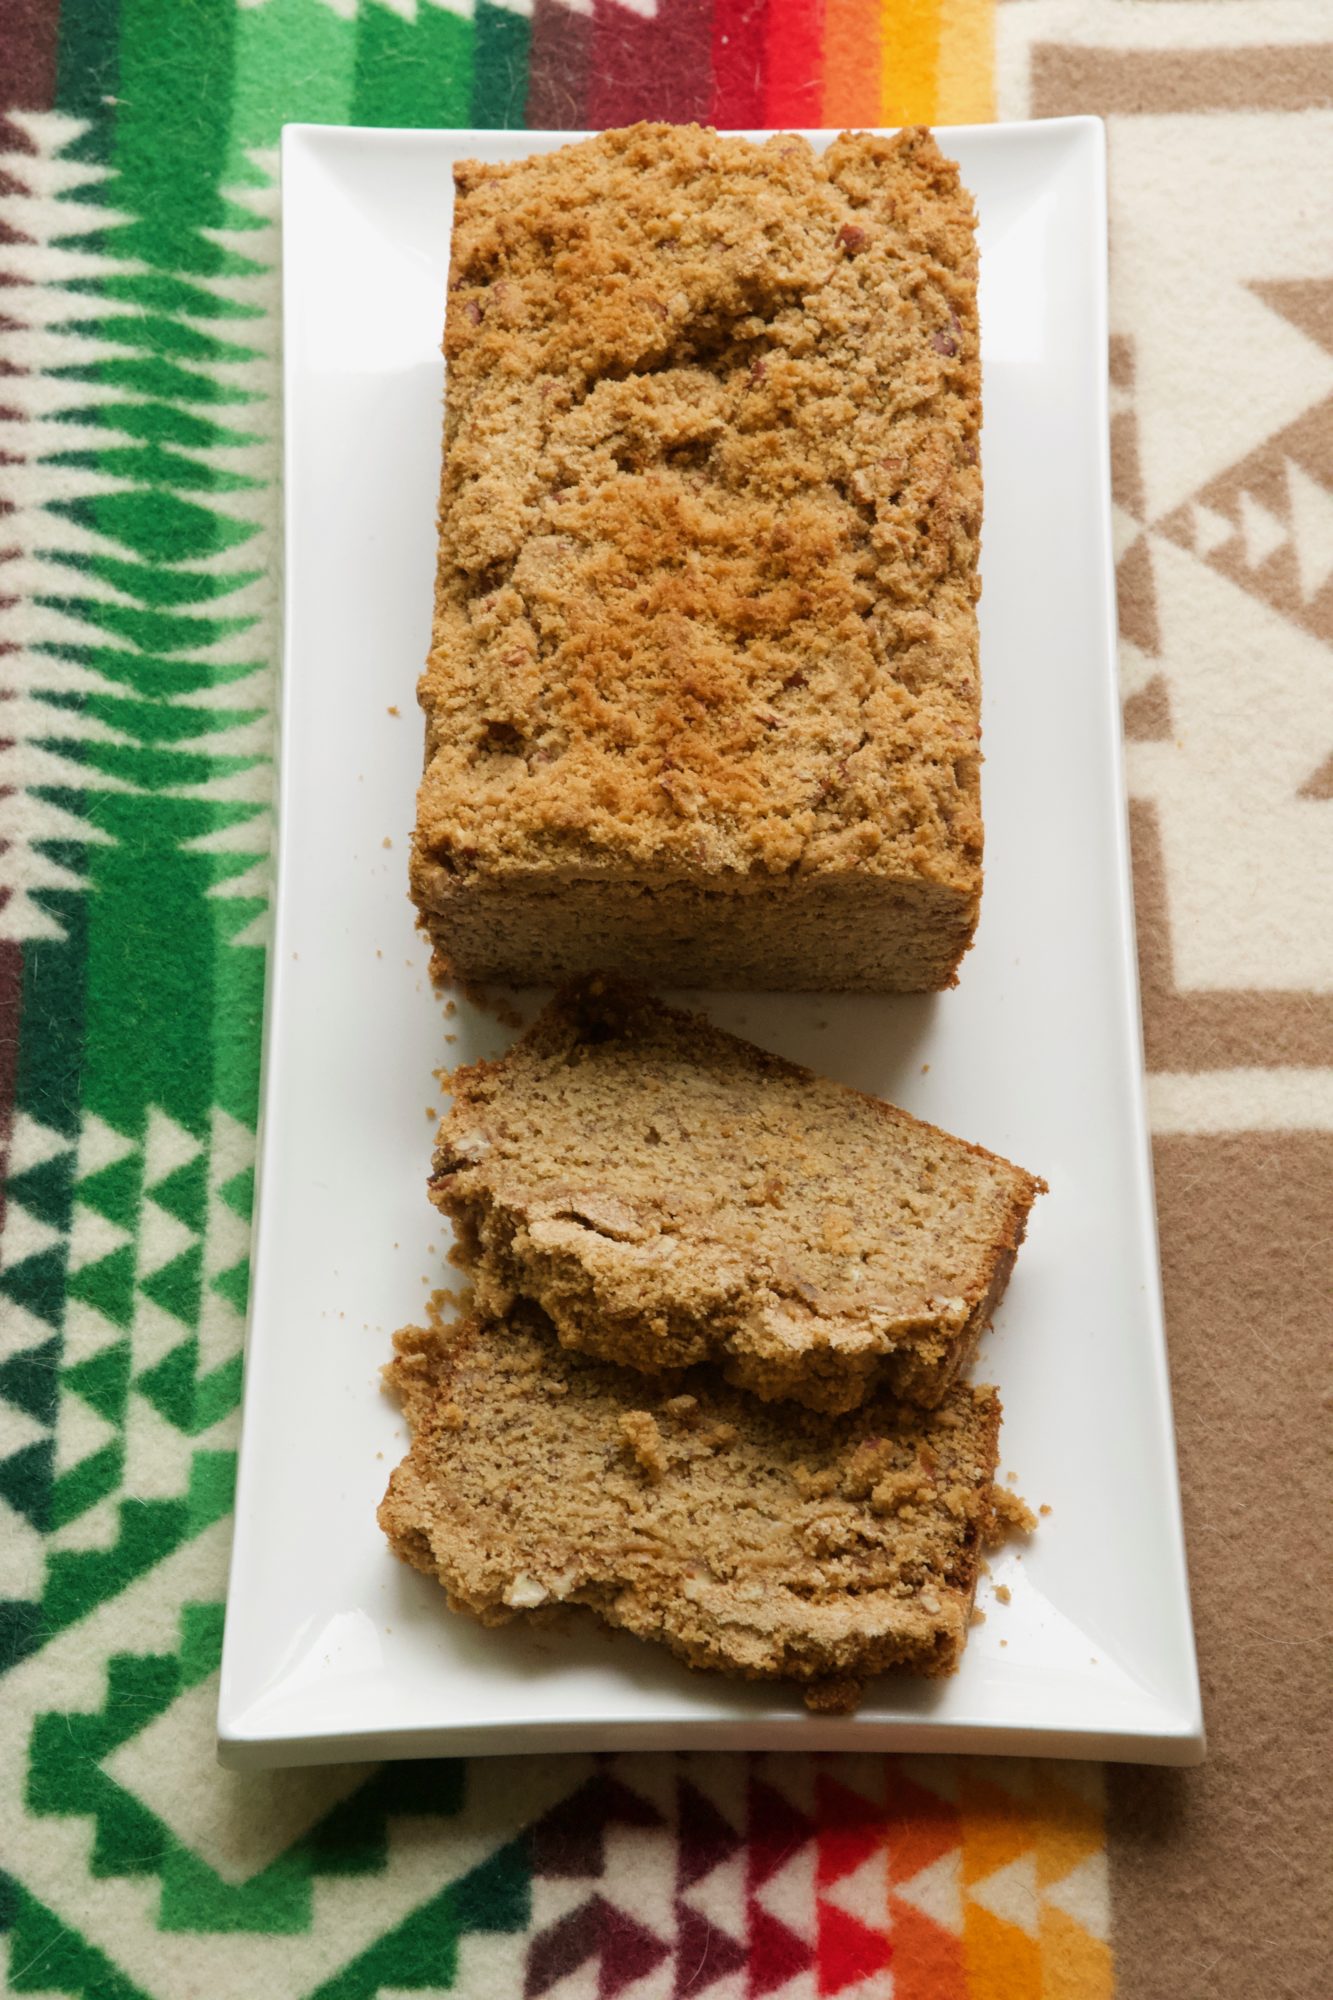 We can't get enough of this Coffee Cake Banana Bread recipe, great for breakfast, brunch & snacks! Brown butter adds to the deliciousness! MarlaMeridith.com